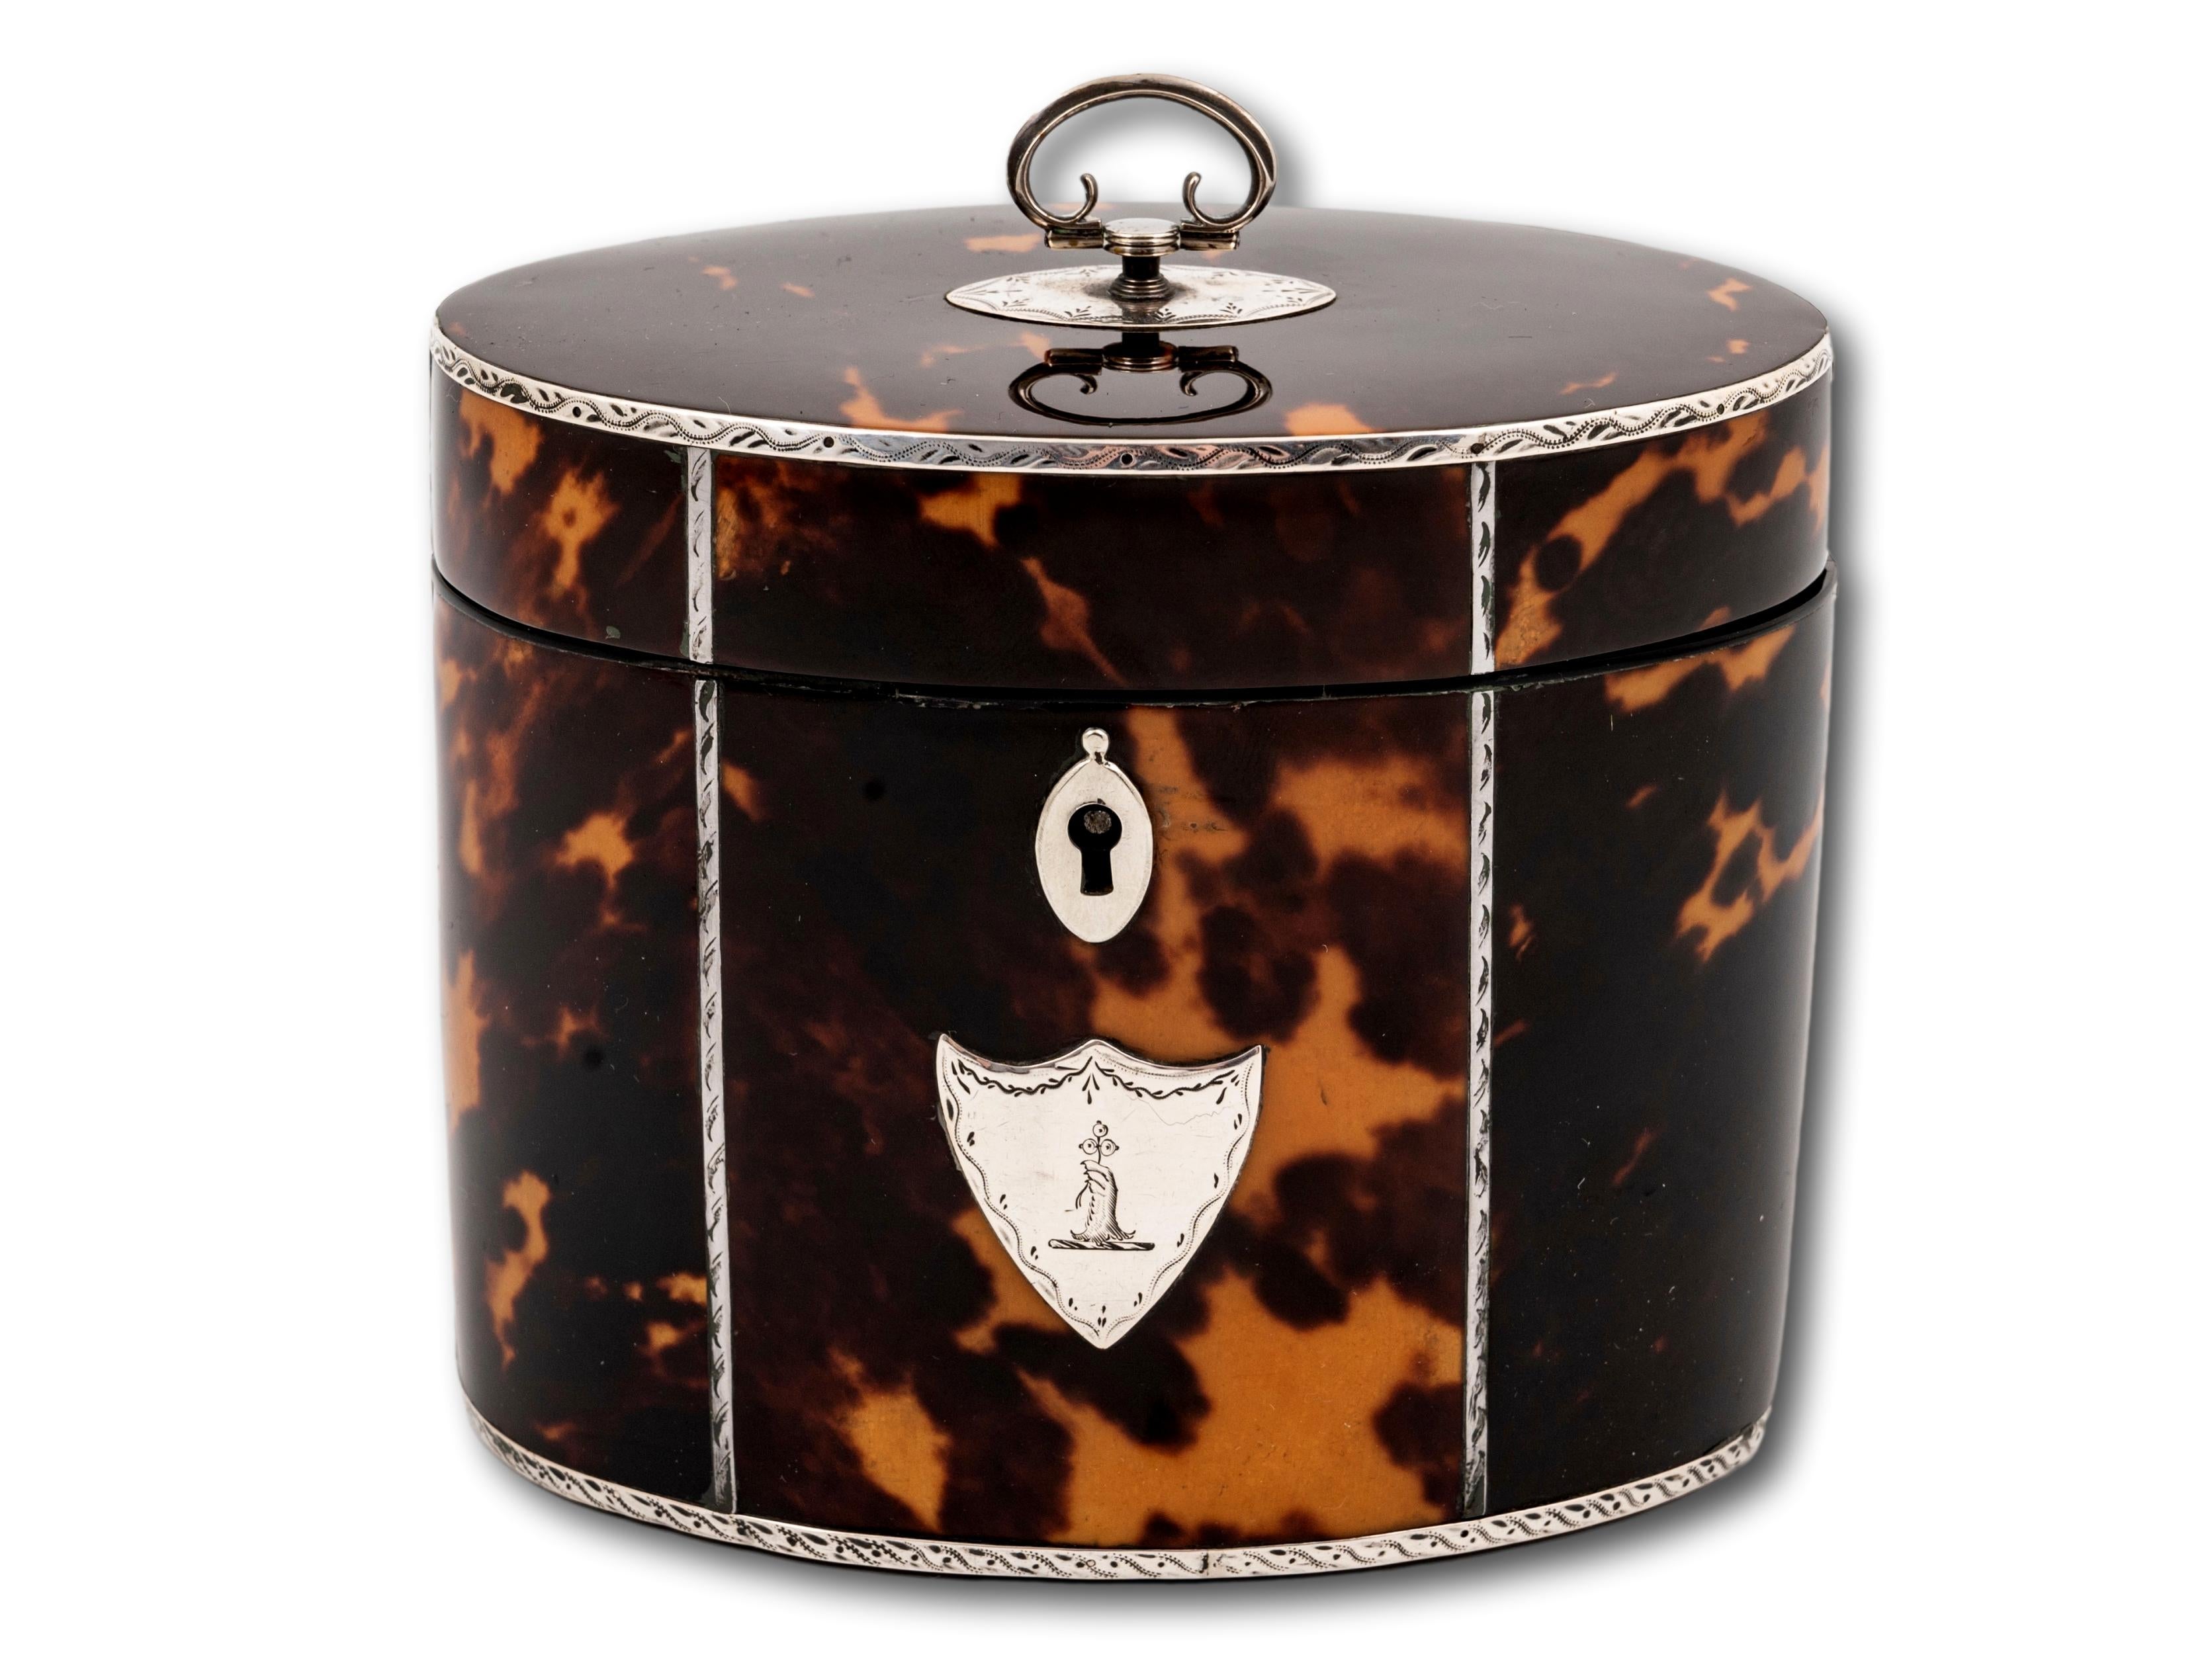 Oval Tea Caddy with Silver Mounts

From our Tea Caddy collection, we are delighted to offer this Georgian Silver and Tortoiseshell Tea Caddy. The Tea Caddy is of oval shape with a Tortoiseshell exterior mounted with engraved silver stringing, a